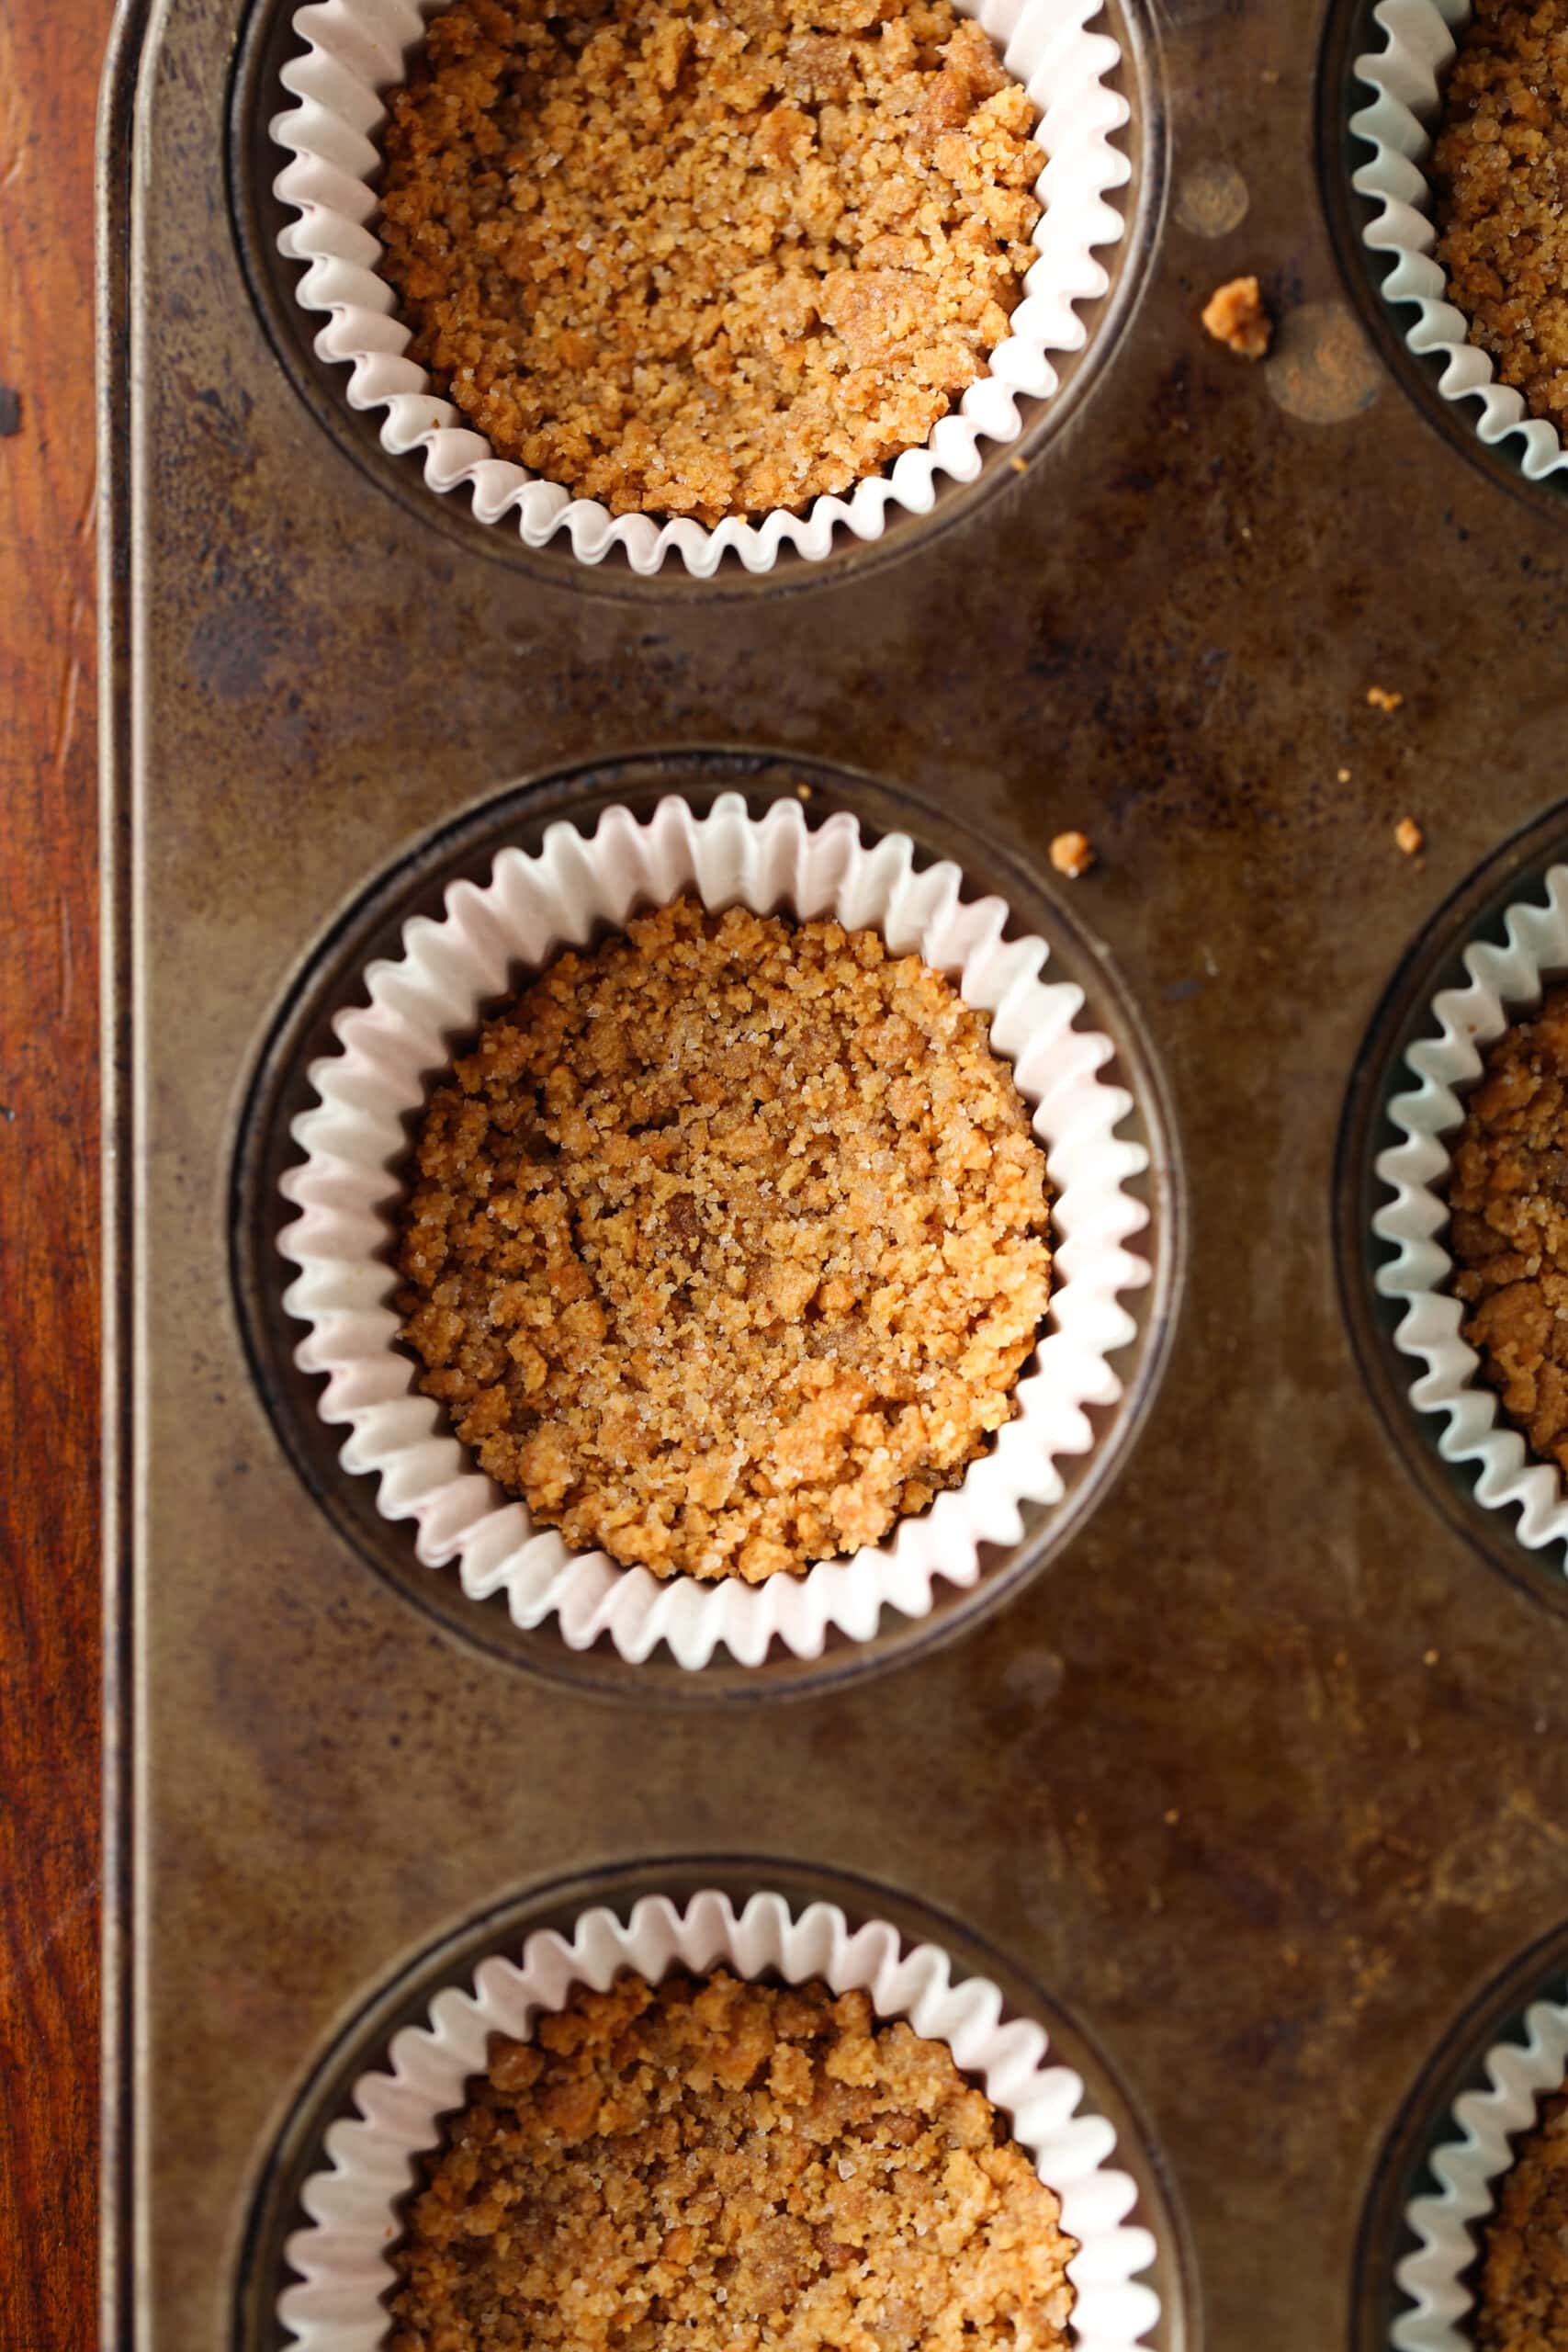 graham cracker crust in cupcake liner baked in a muffin tin